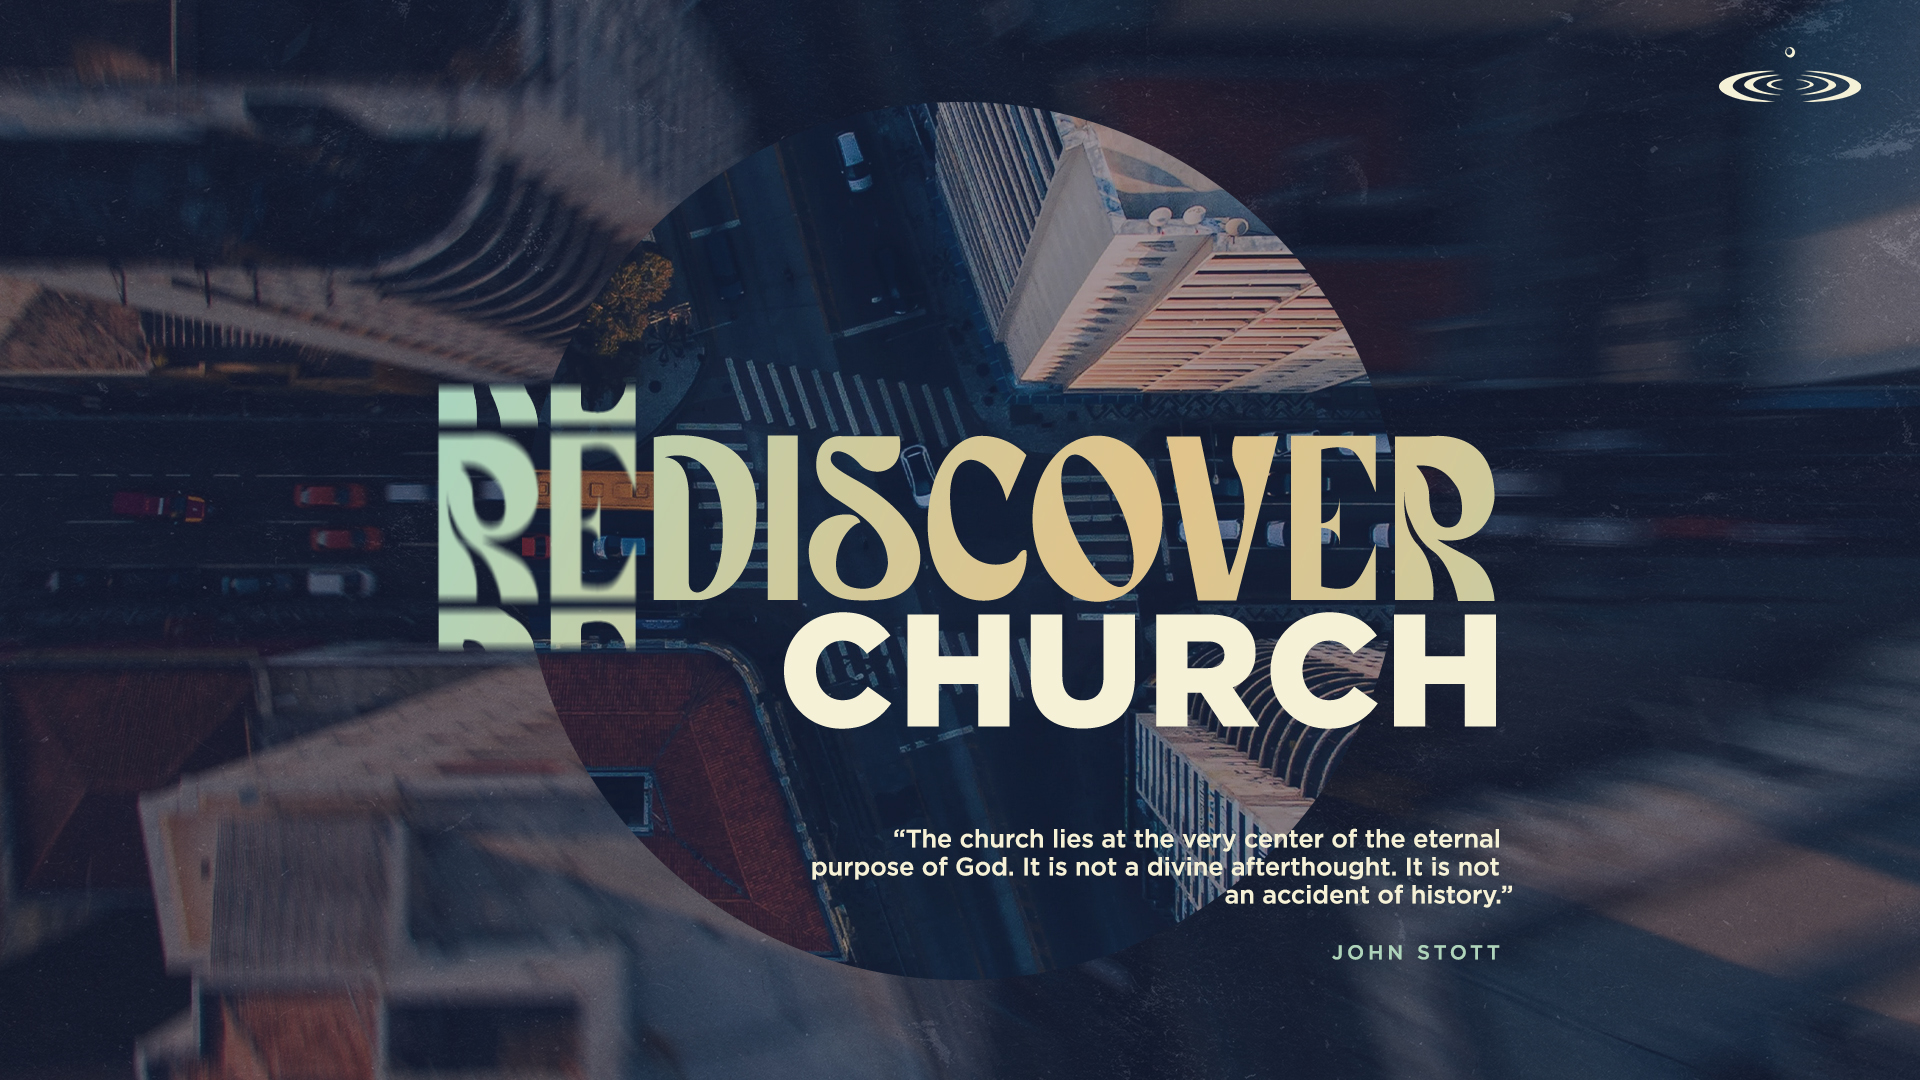 Rediscover Church, Part 2: “The Church Scattered”